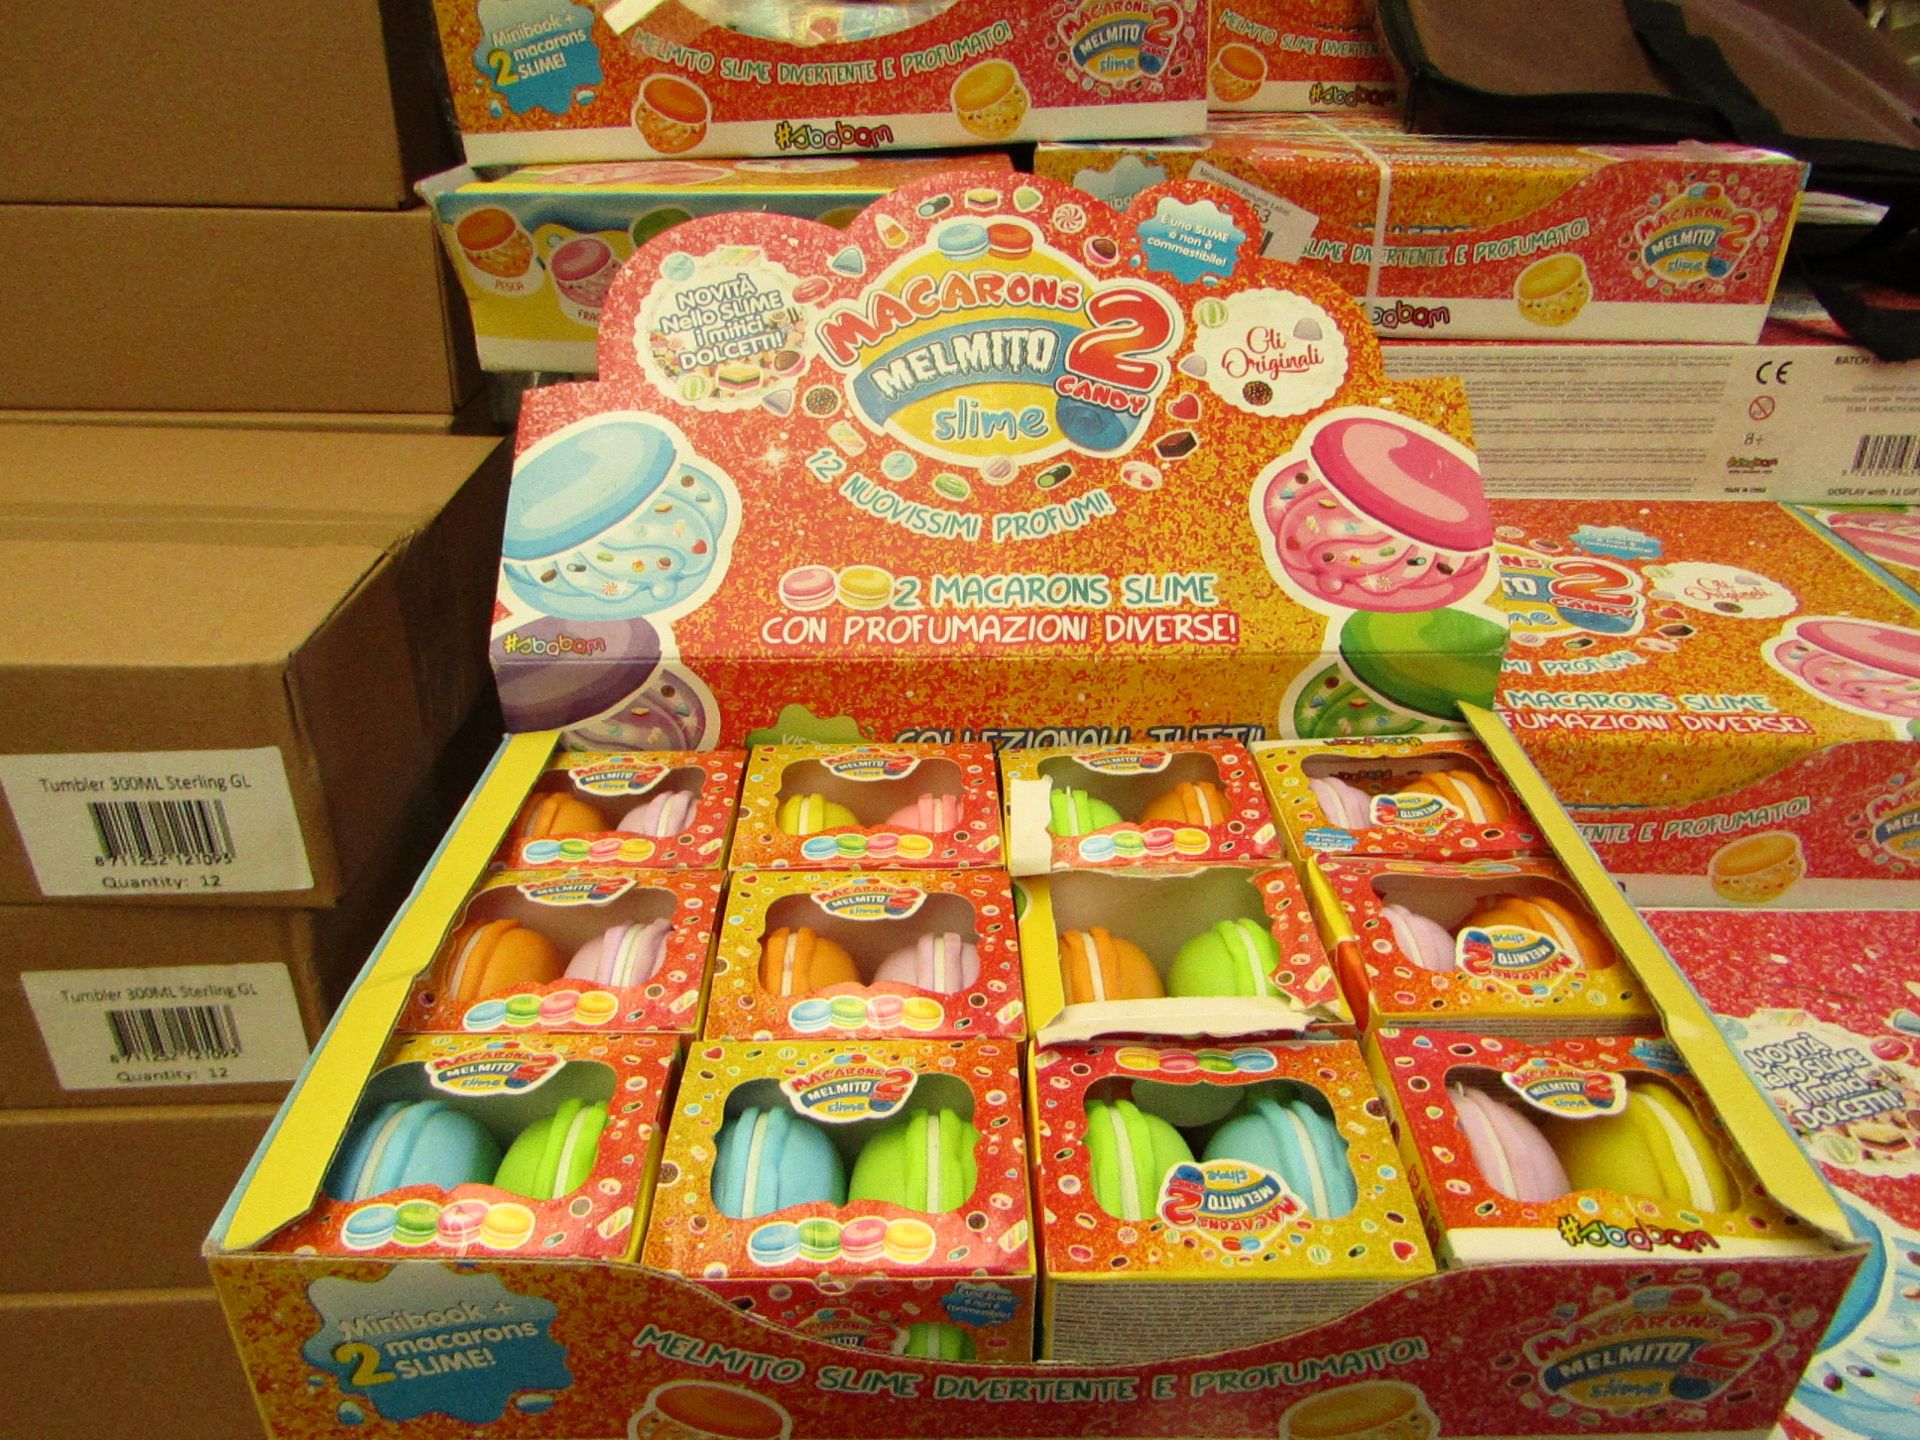 1 x Box of 12 Packs of 2 Macarons Slime - New & Boxed.